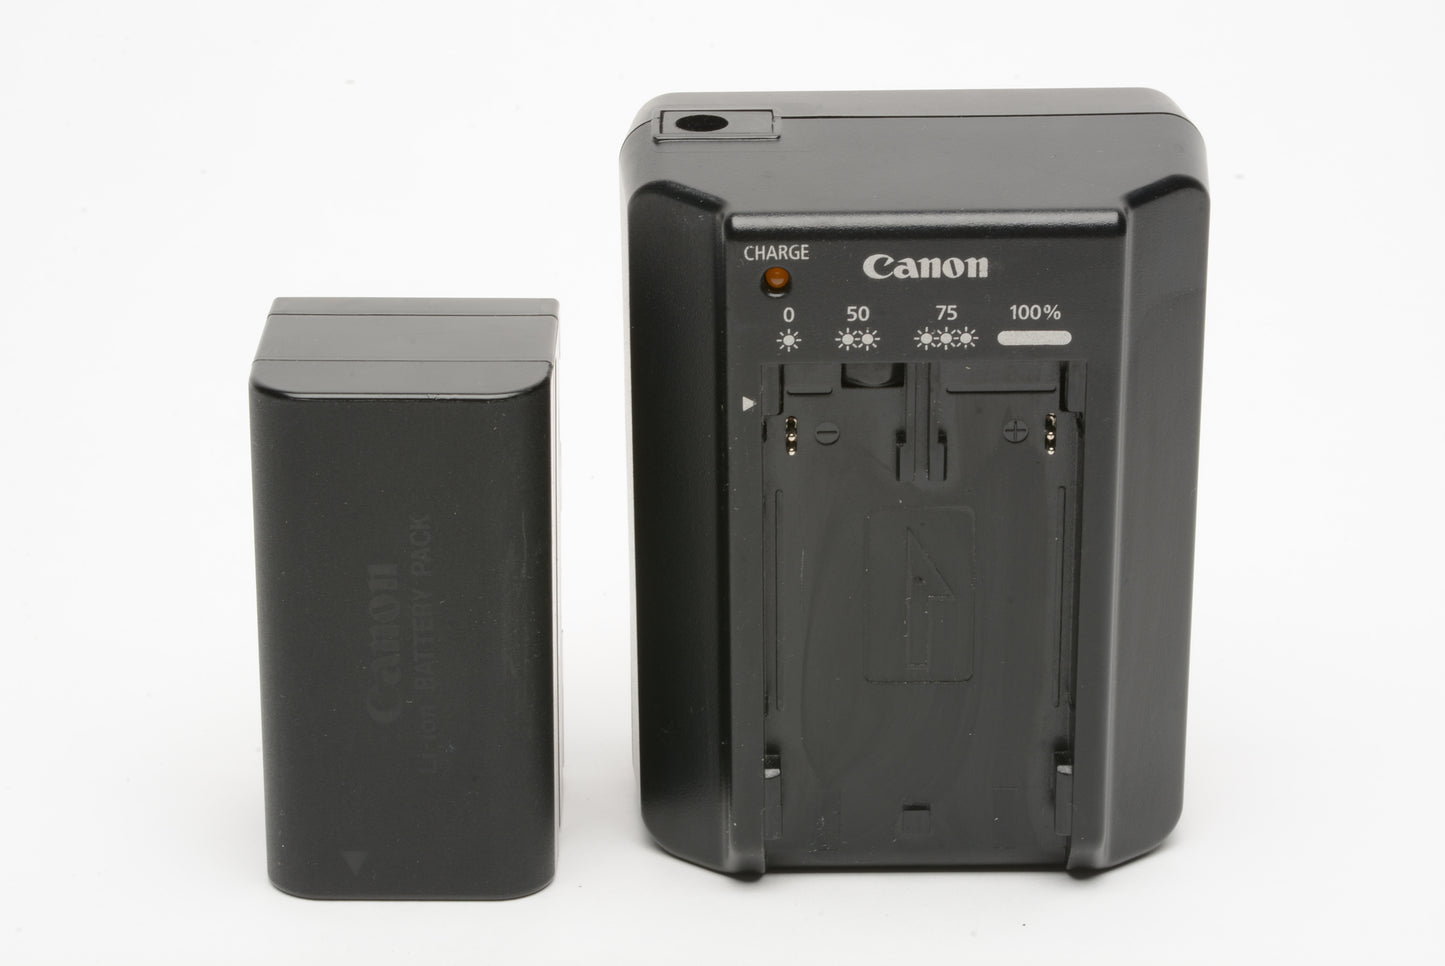 Canon CA-920 Genuine Charger For Canon BP-900 series batteries + BP-930 battery